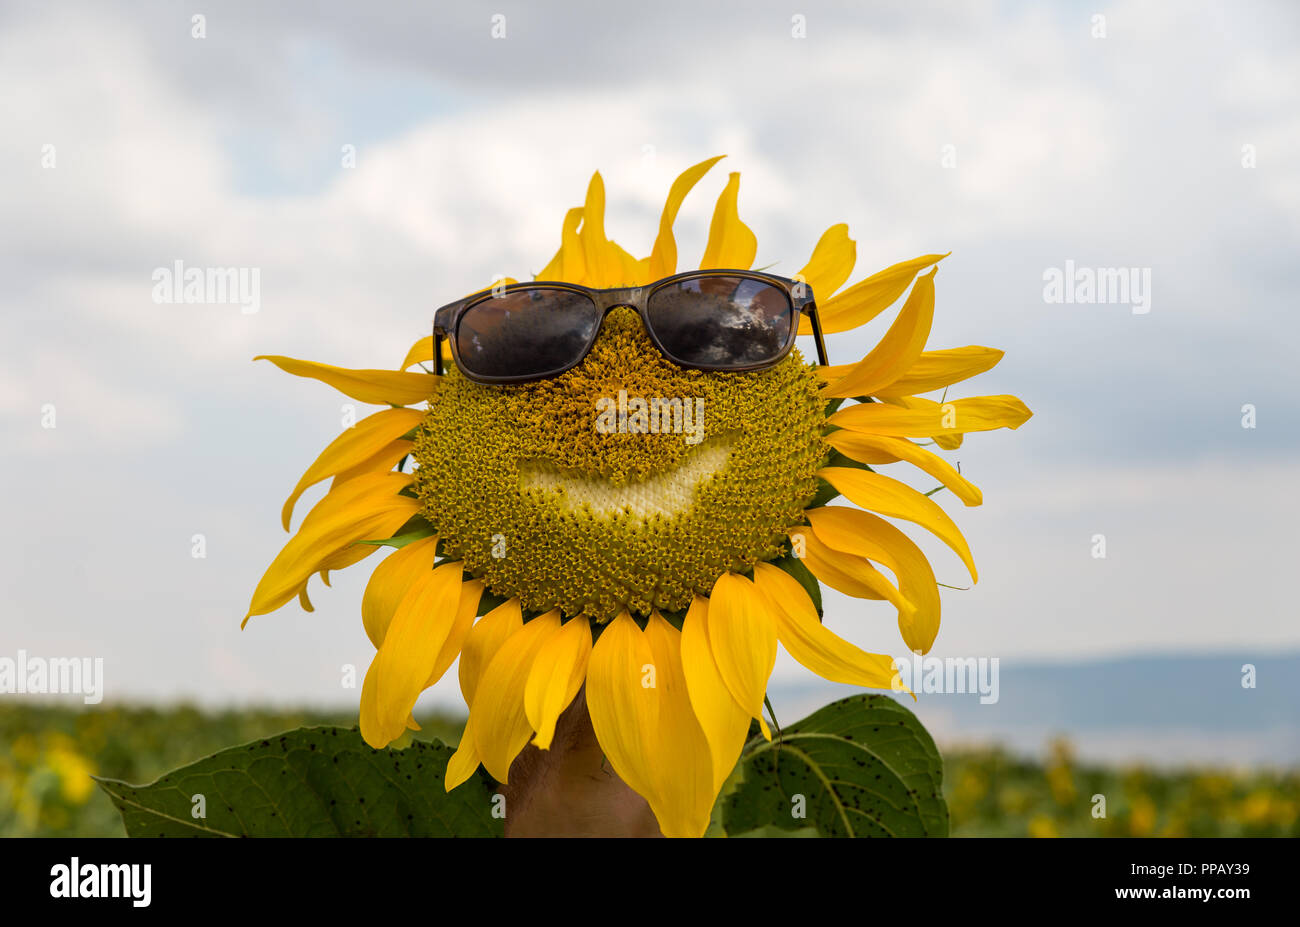 Smiling face Sunflower with sunglasses in the sunflower field. Stock Photo